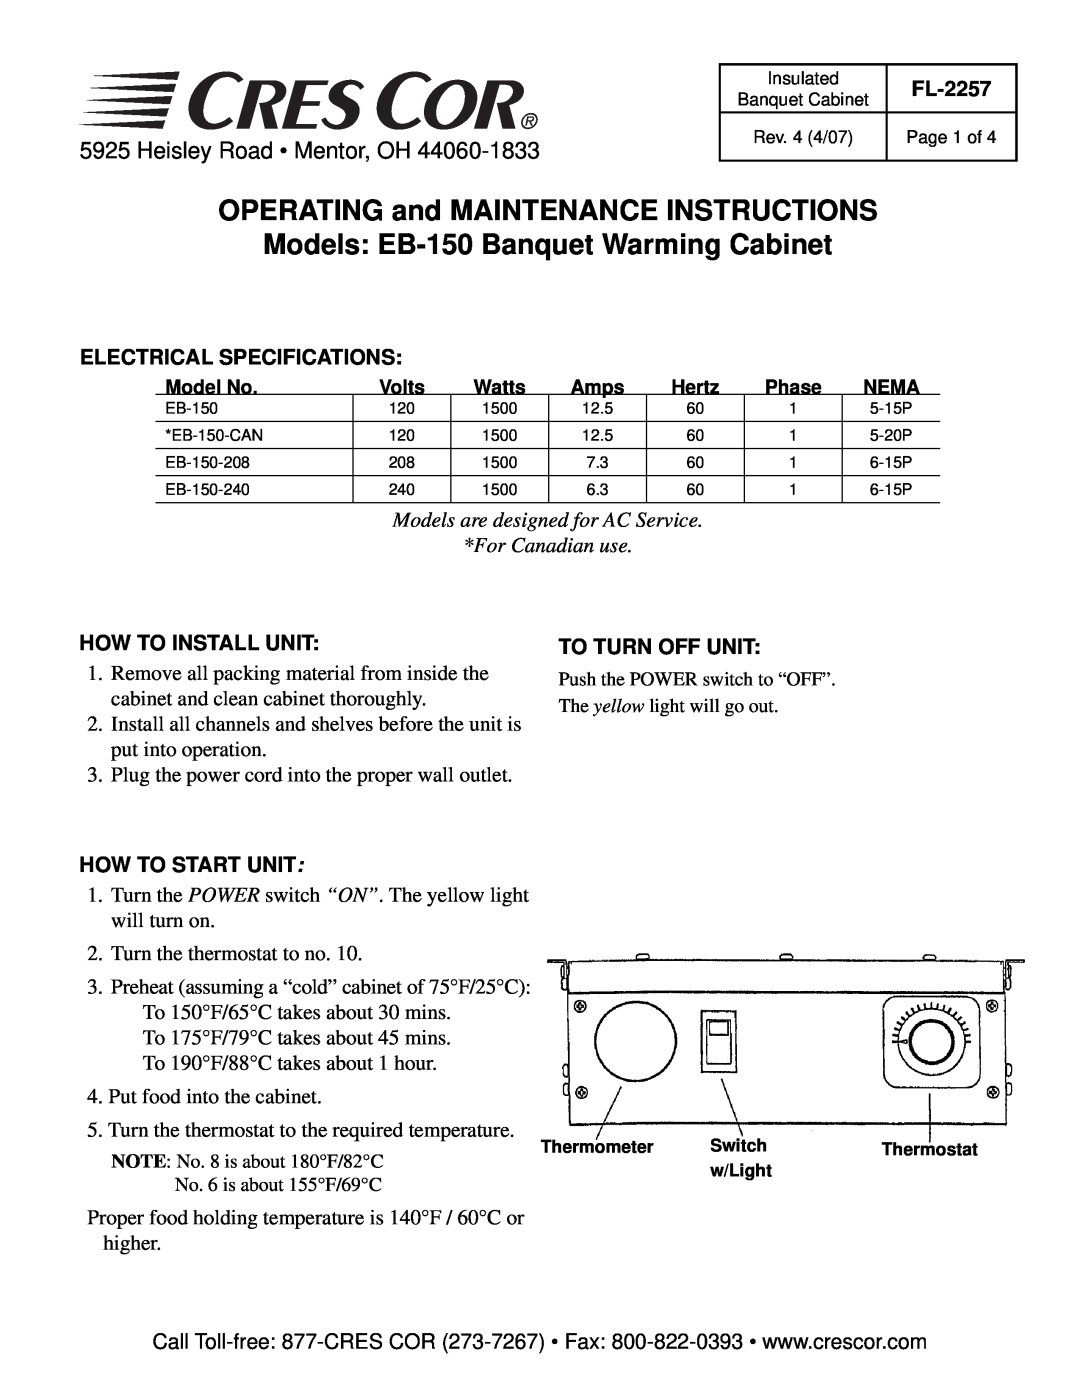 Cres Cor specifications OPERATING and MAINTENANCE INSTRUCTIONS, Models EB-150Banquet Warming Cabinet, For Canadian use 